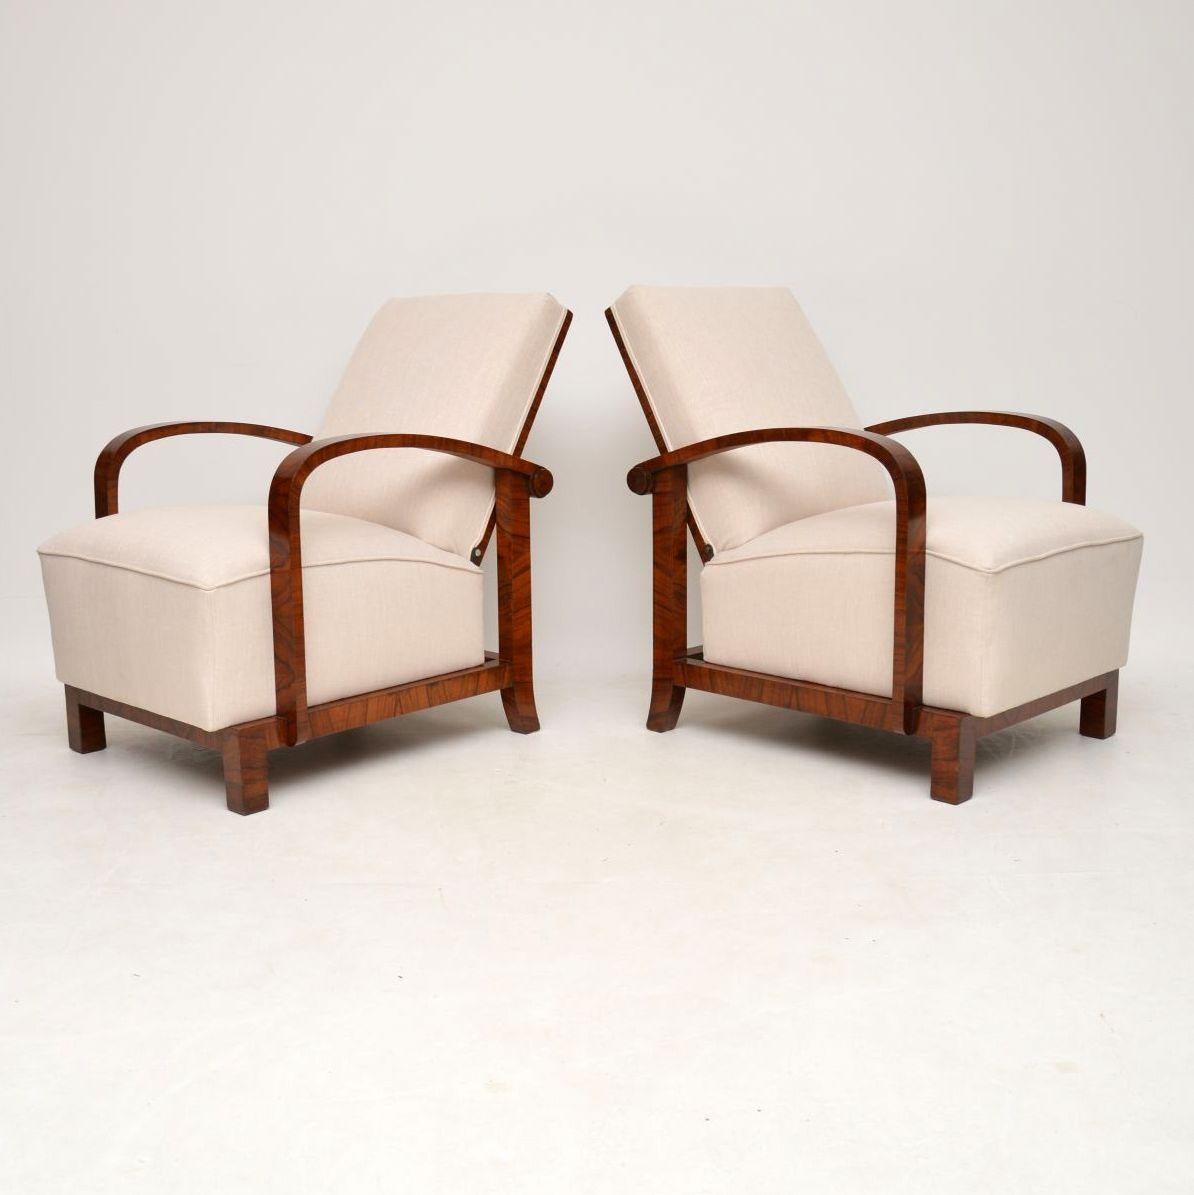 Very stylish pair of Swedish Art Deco walnut armchairs in good original condition and having just been re-upholstered in a cream fabric. They have fully sprung seats and the backs recline further. These armchairs date to circa 1930s